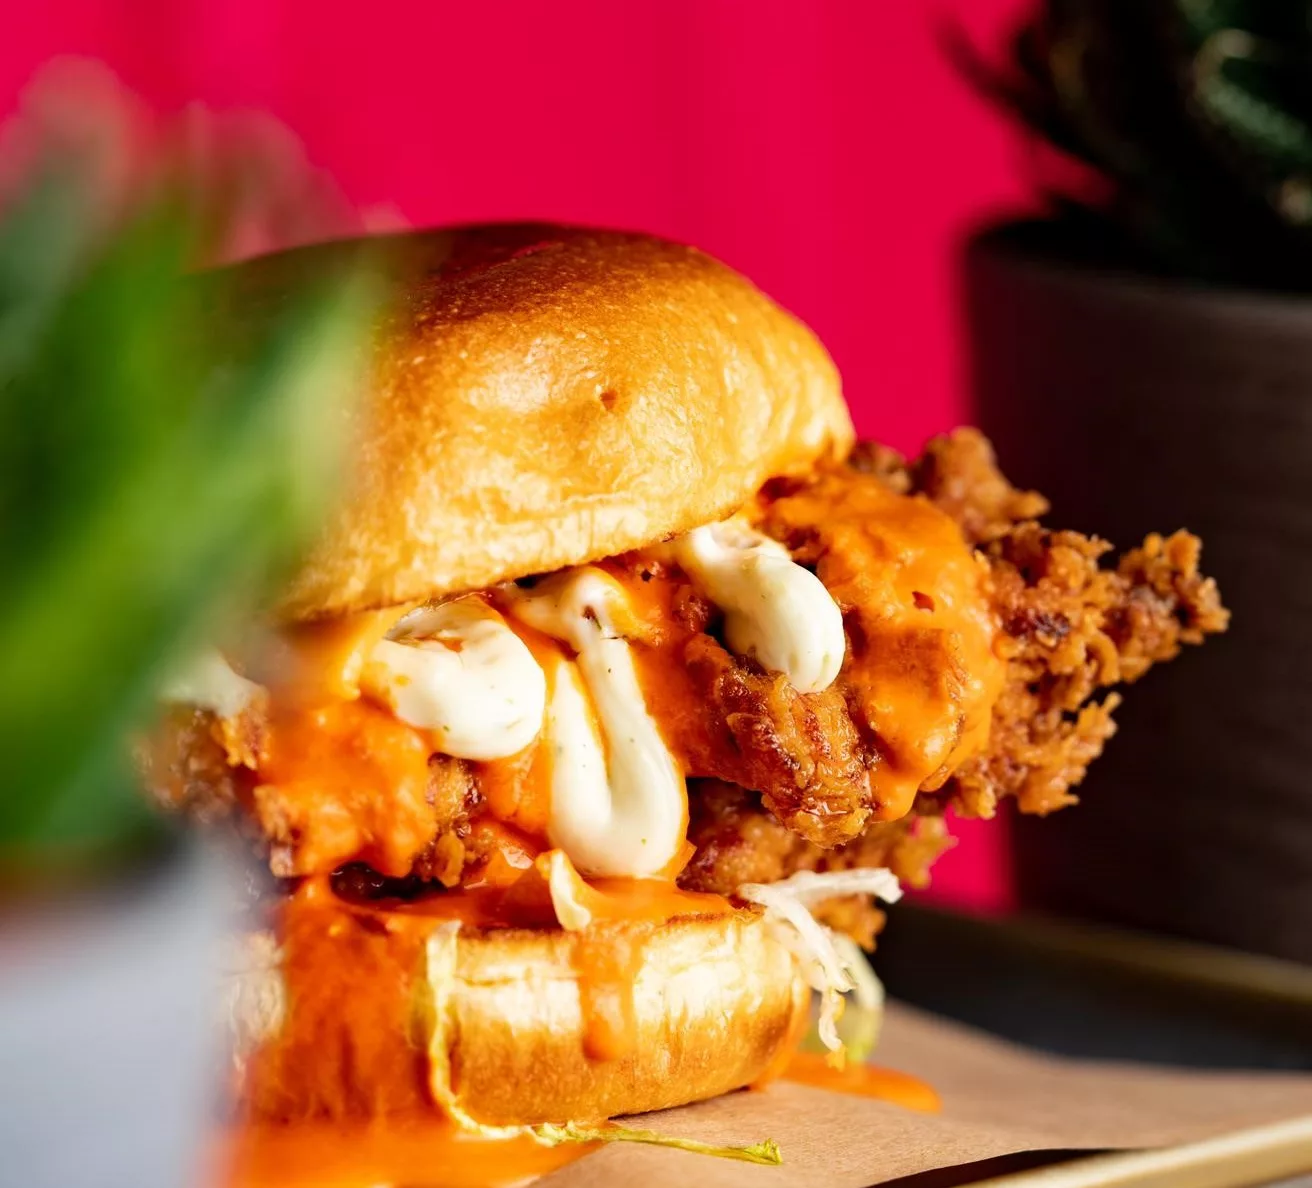 A closeup of a fried chicken burger on brown waxed paper, in a brioche bun with mayo and hot sauce.